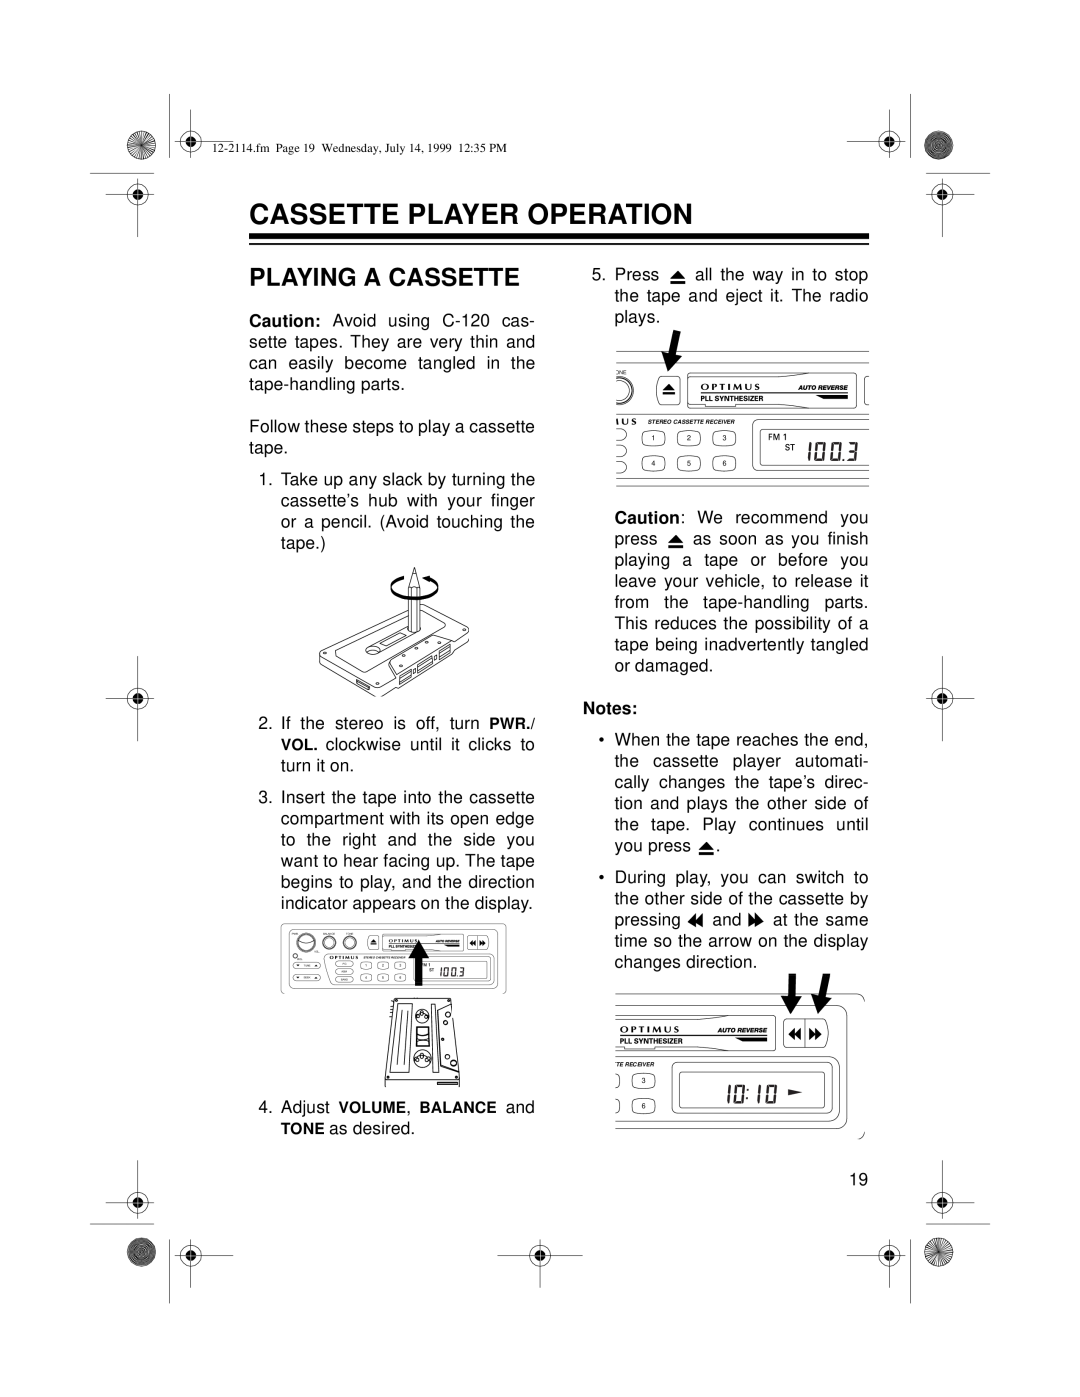 Optimus 12-2114, 4301-3838-0 owner manual Cassette Player Operation, Playing A Cassette 